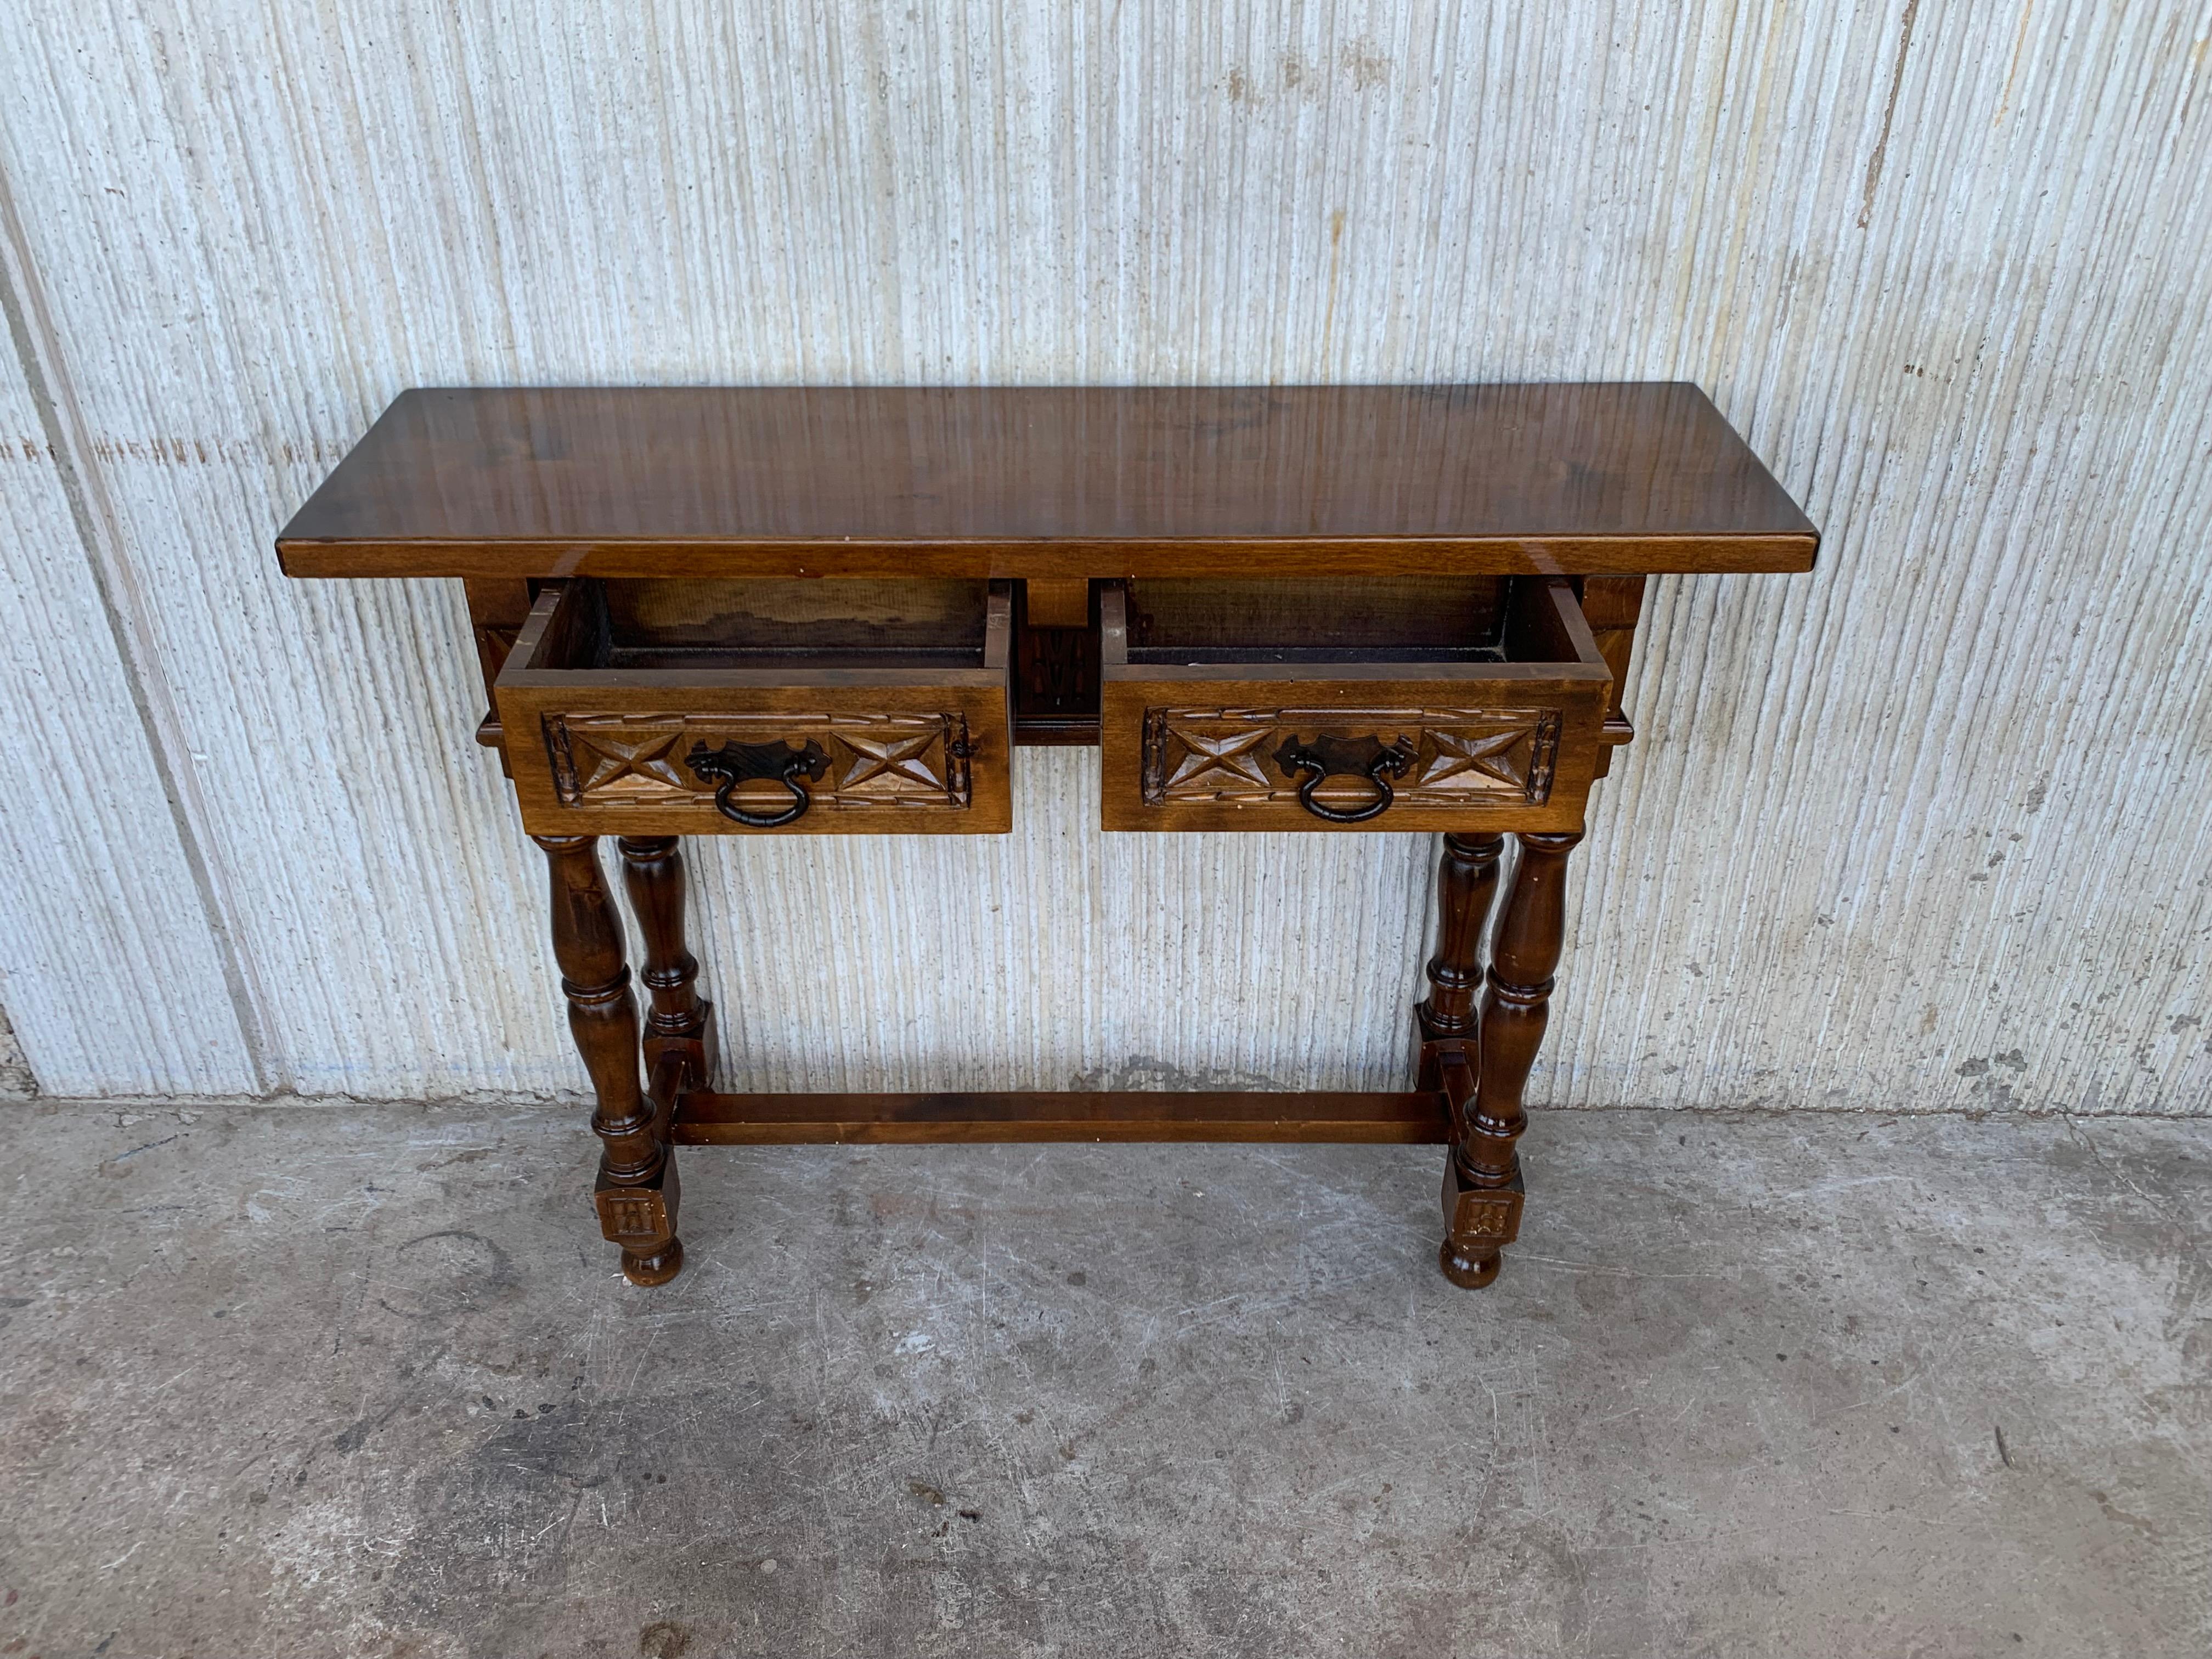 Baroque 20th Century Spanish Tuscan Console Table with Two Drawers and Turned Legs For Sale